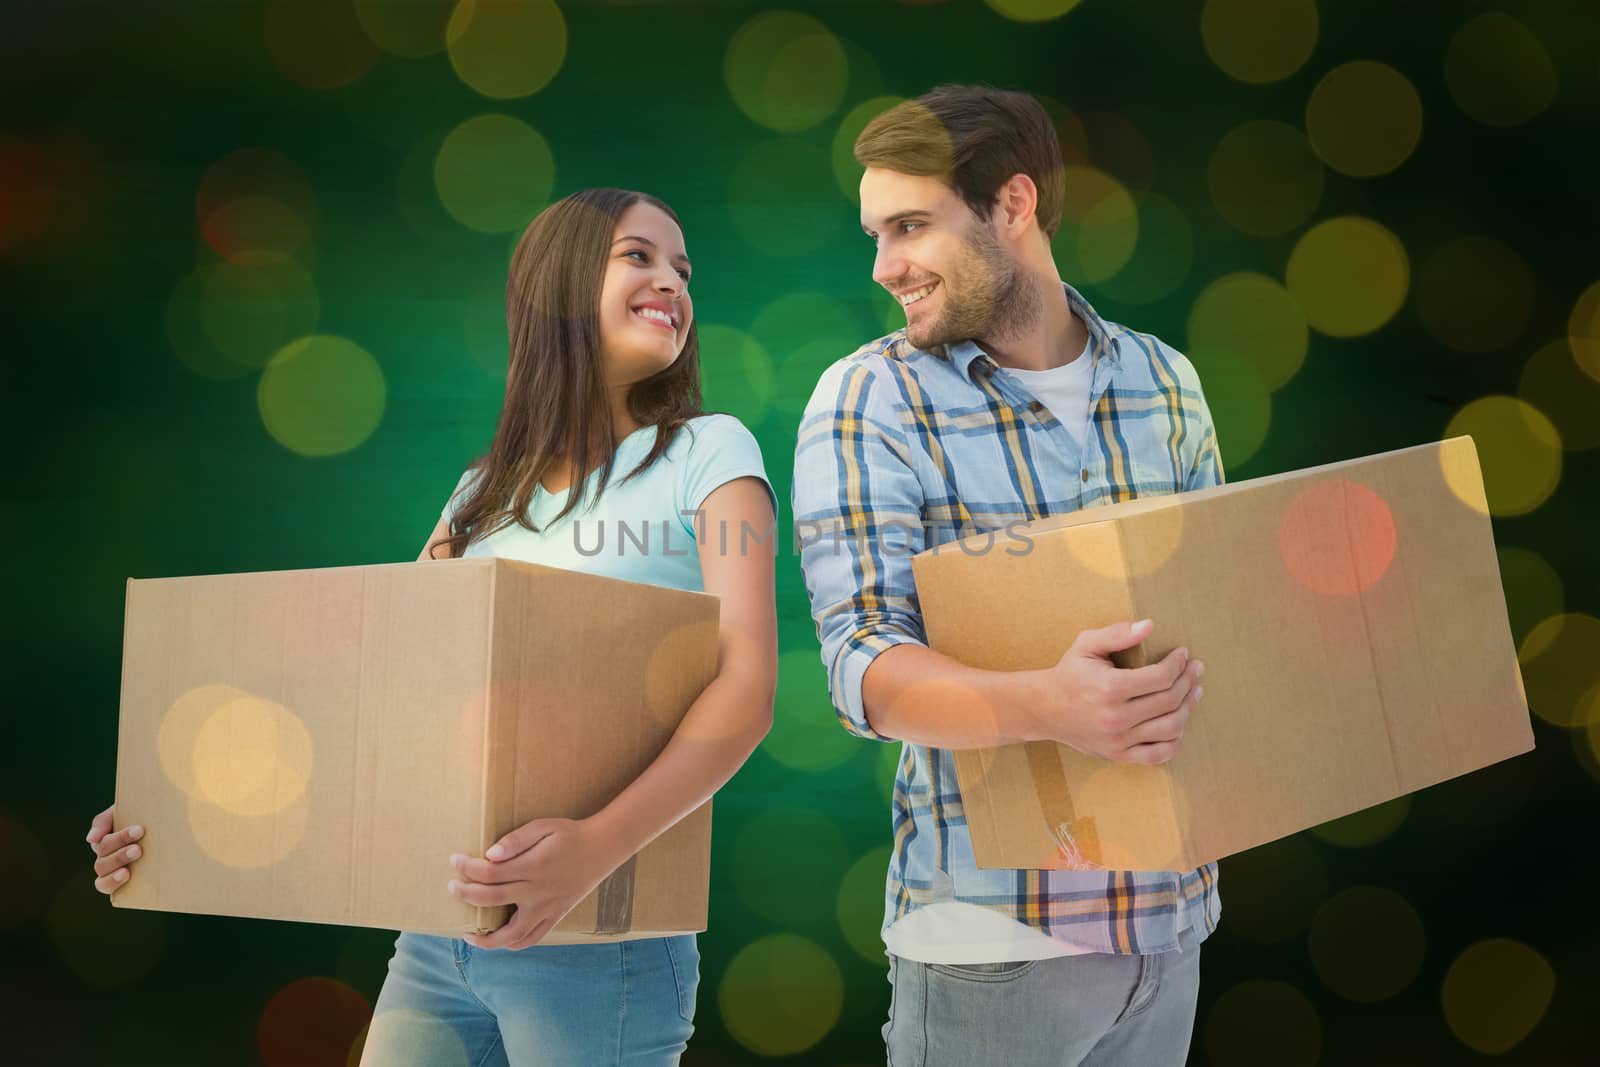 Happy young couple with moving boxes against close up of christmas lights